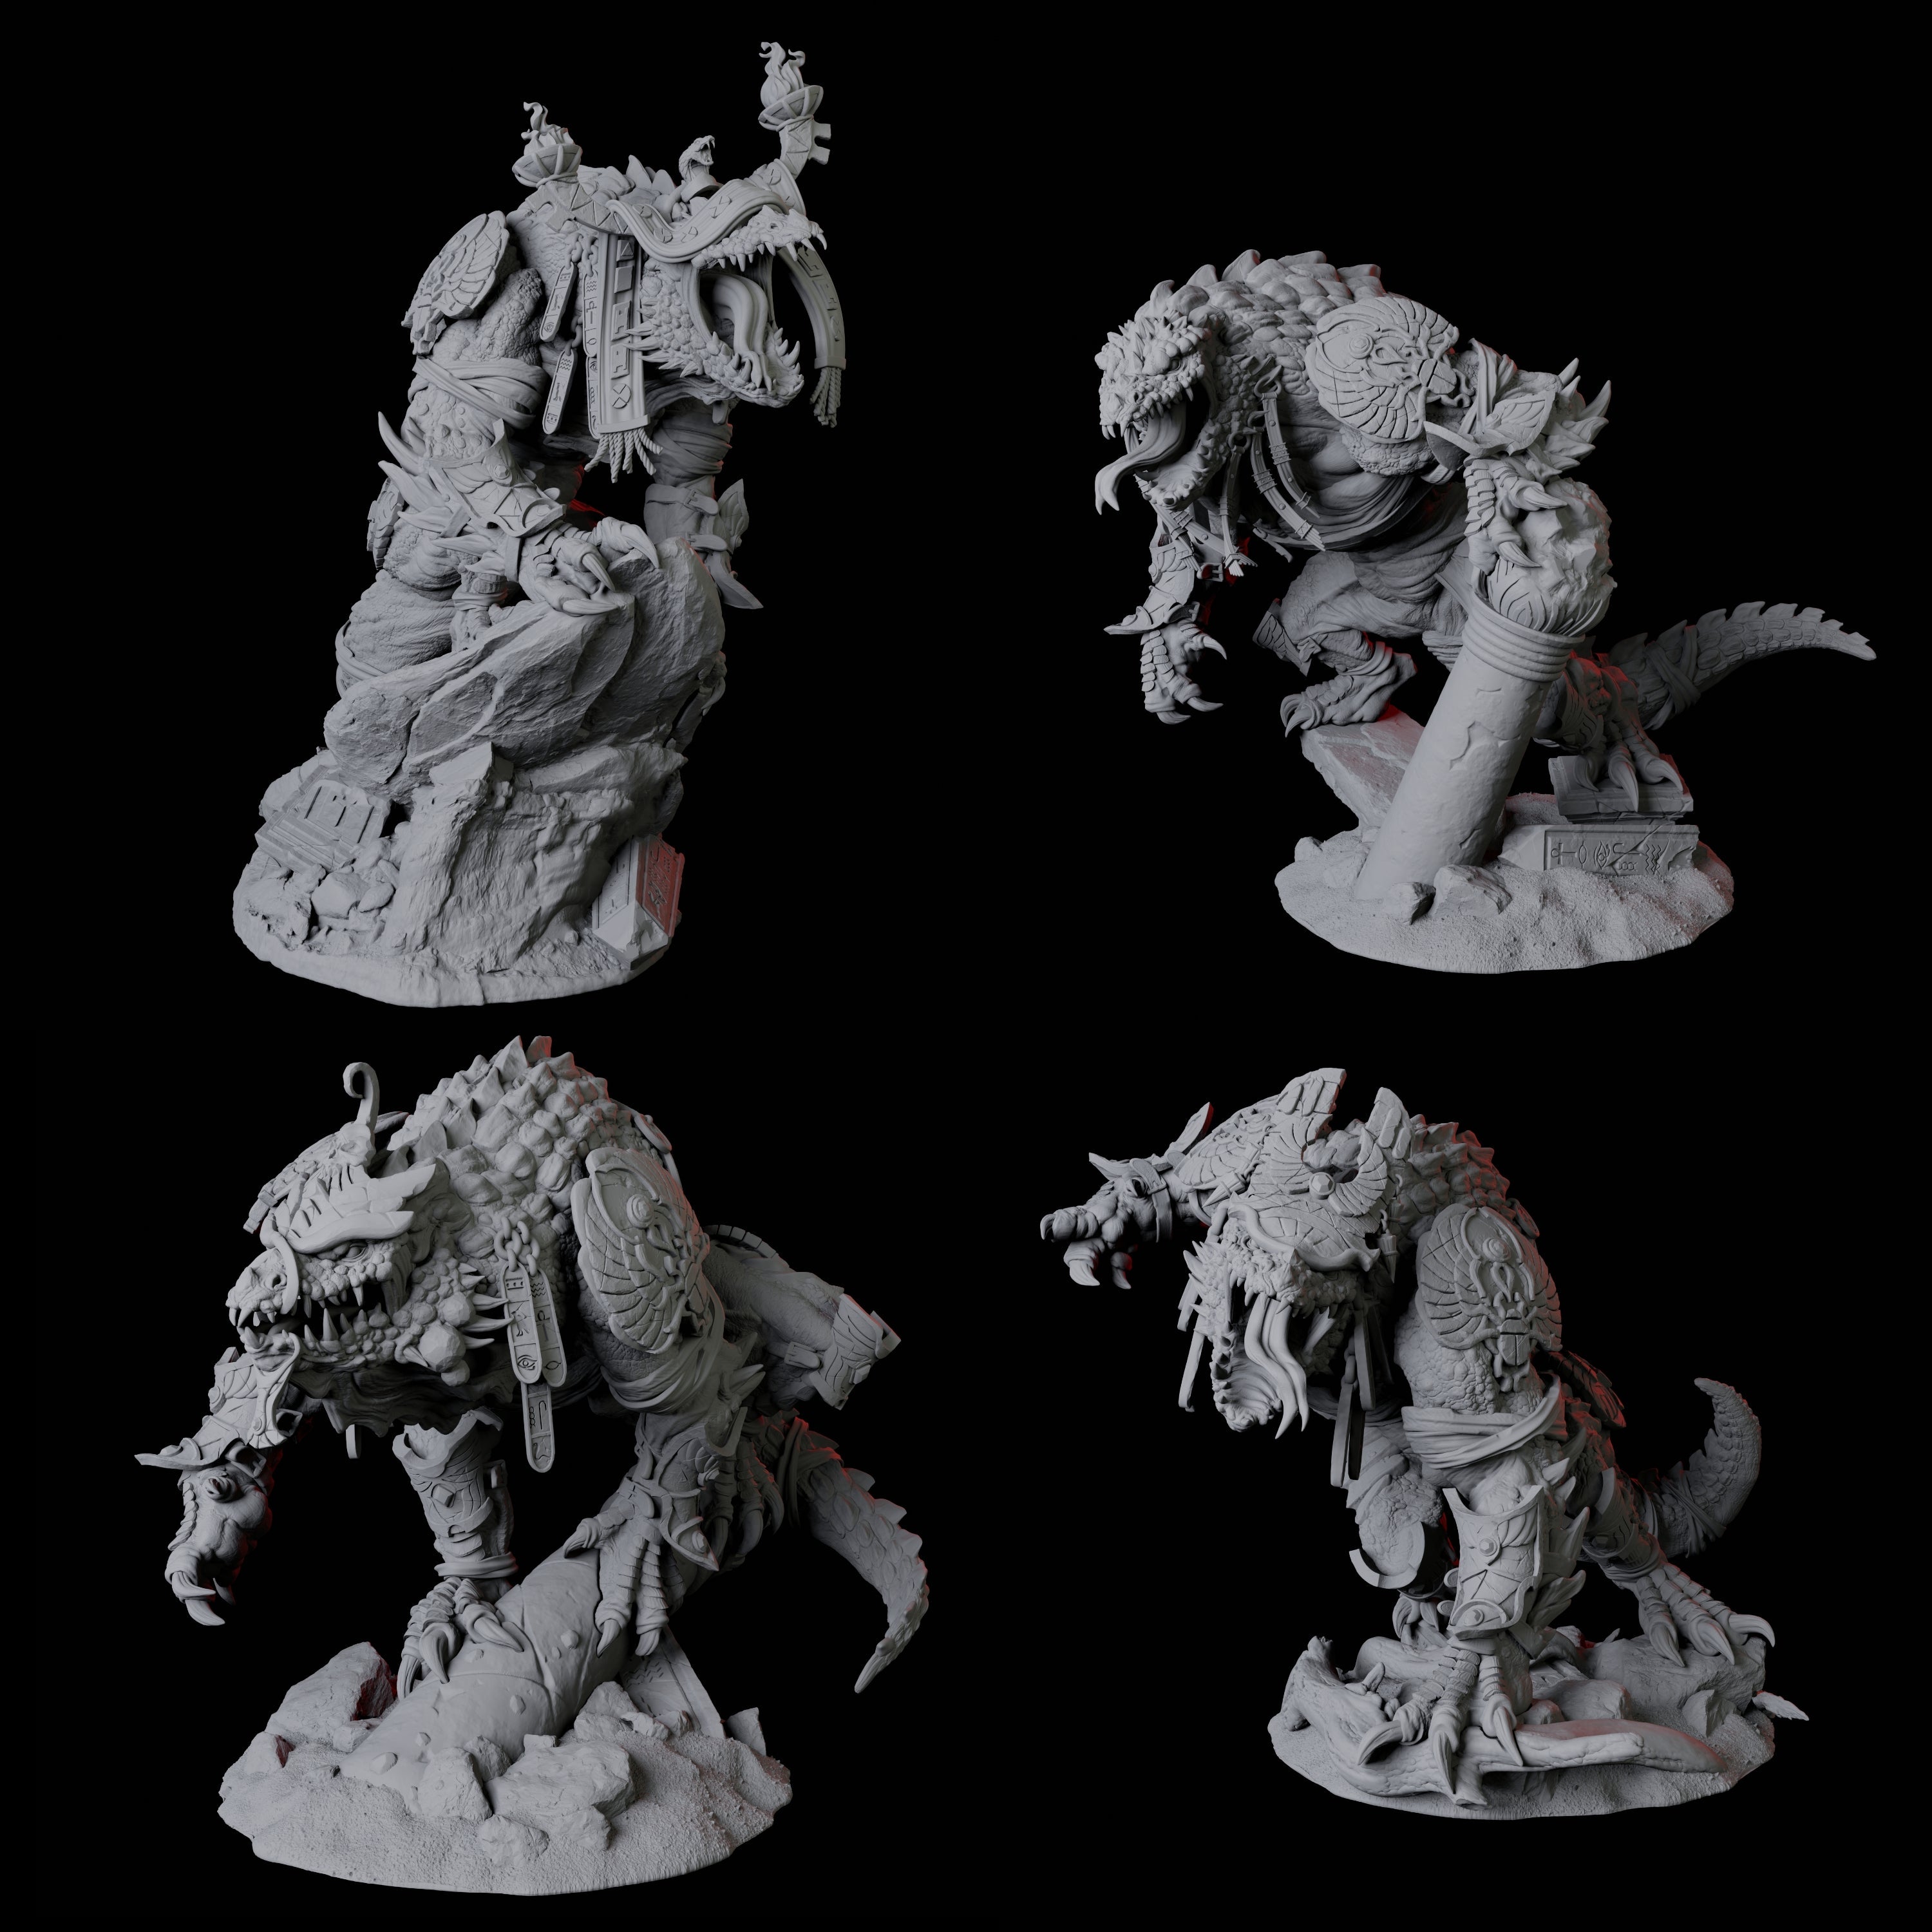 Four Crocodile Lizardfolk Warriors Miniature for Dungeons and Dragons, Pathfinder or other TTRPGs